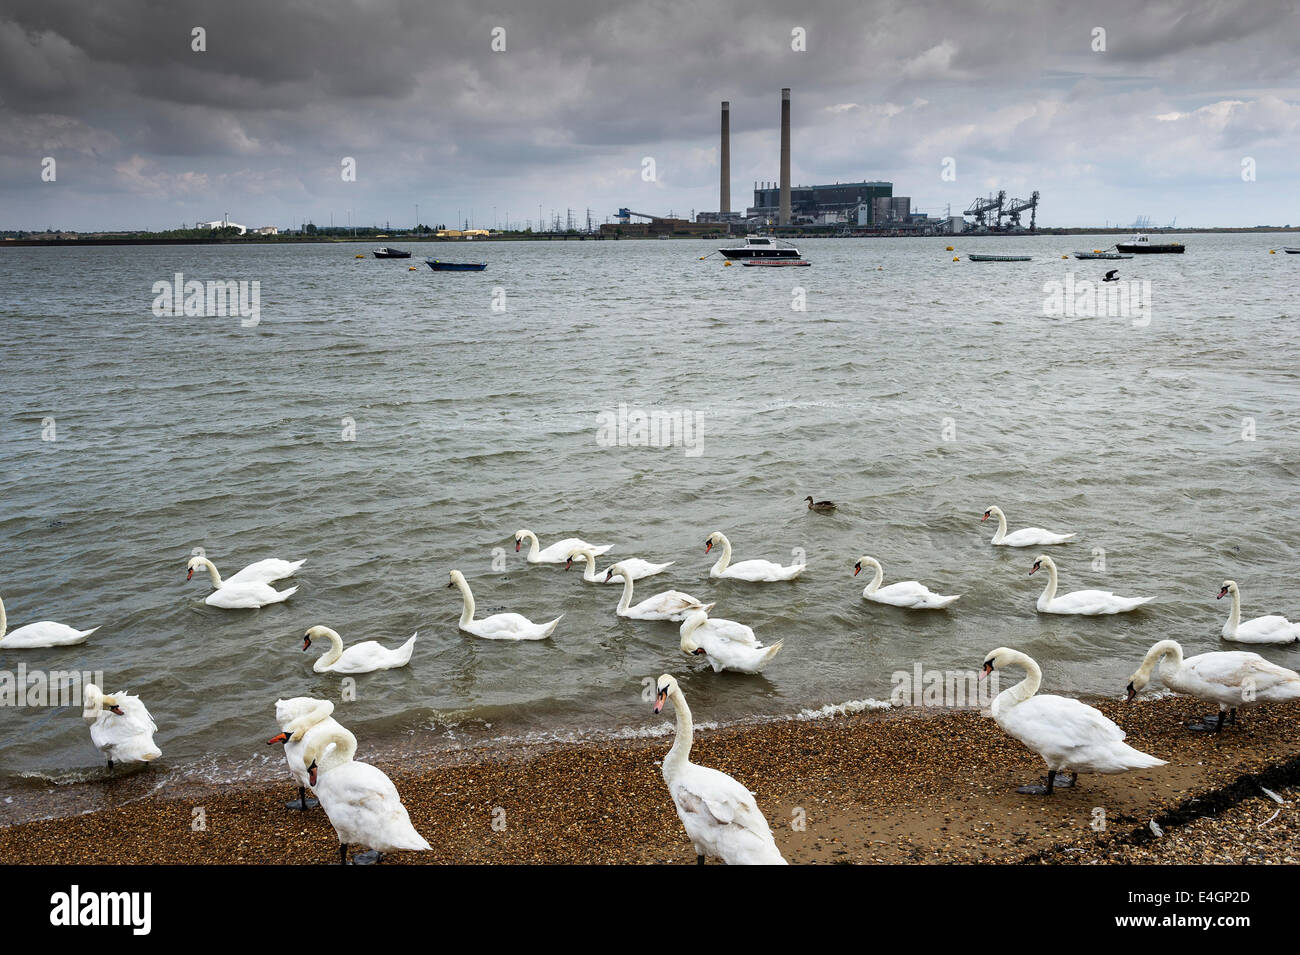 Swans gathering at the waters edge at Gravesend. Stock Photo